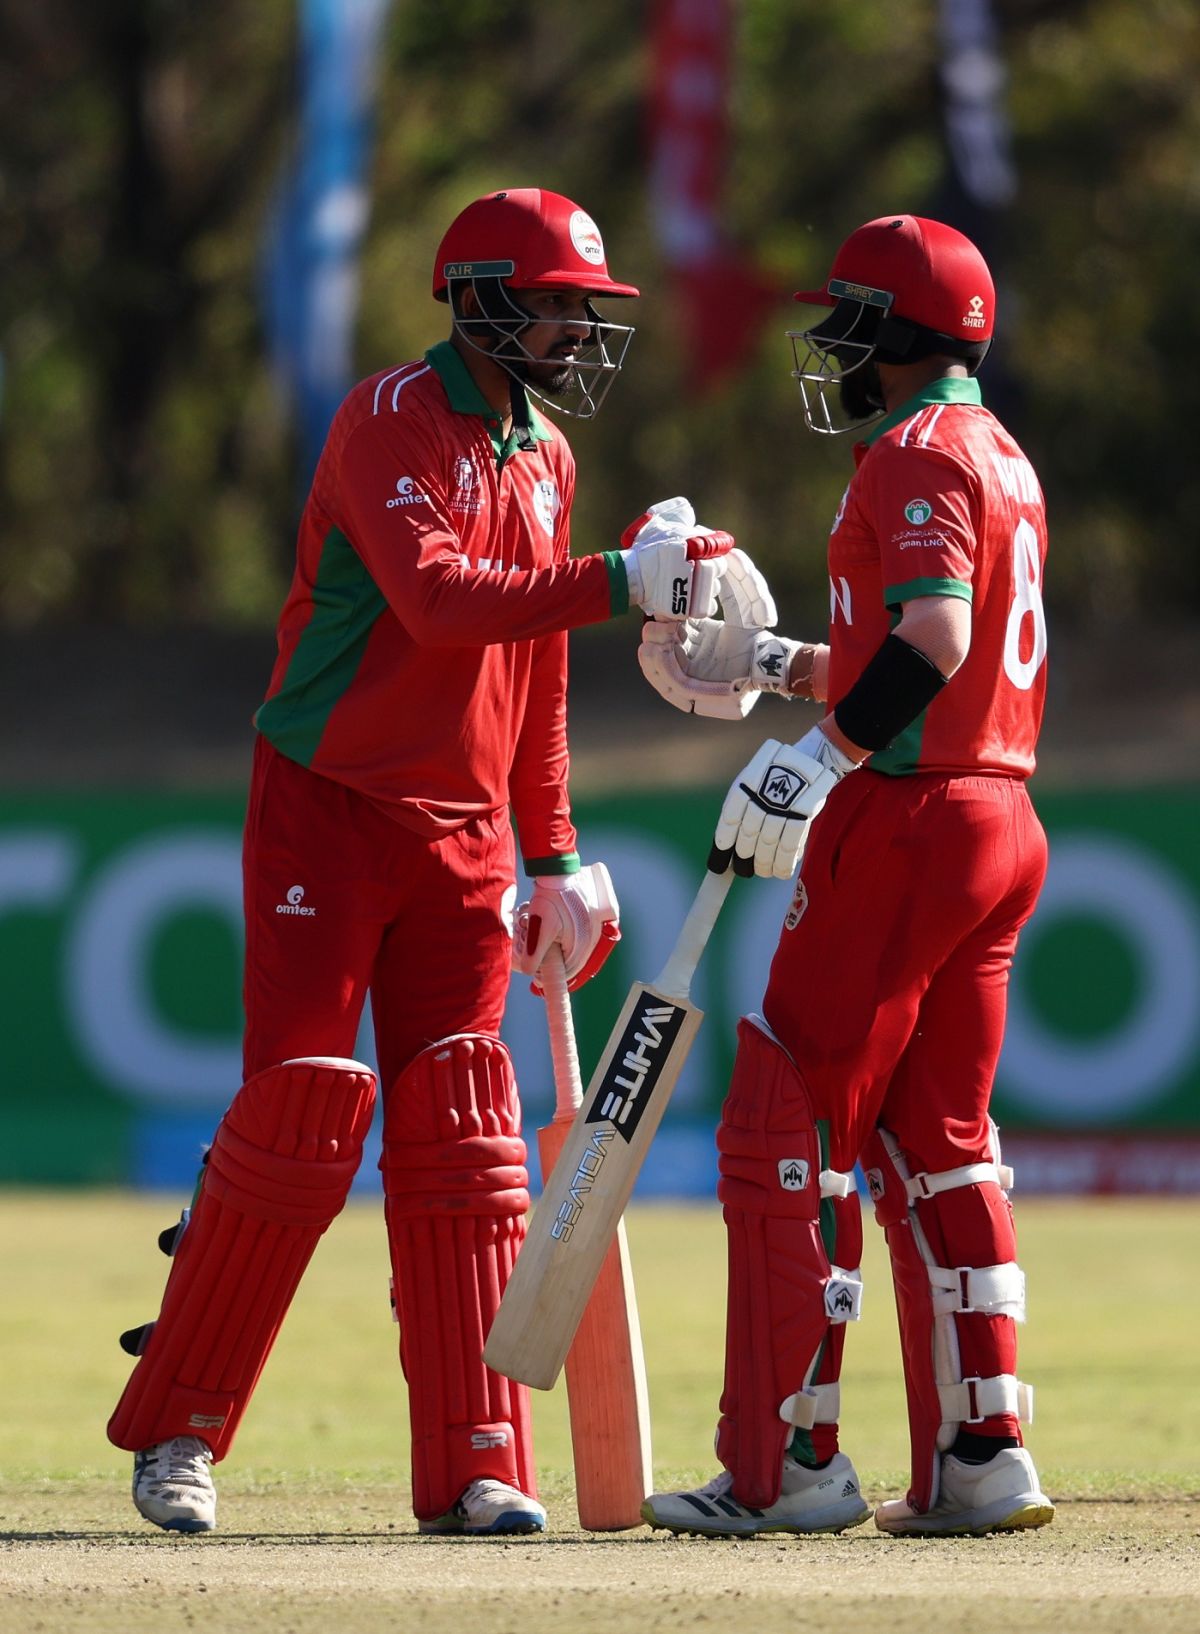 Aqib Ilyas and Kashyap Prajapati added 94 runs for the second wicket, Ireland vs Oman, World Cup Qualifier, Bulawayo, June 19, 2023